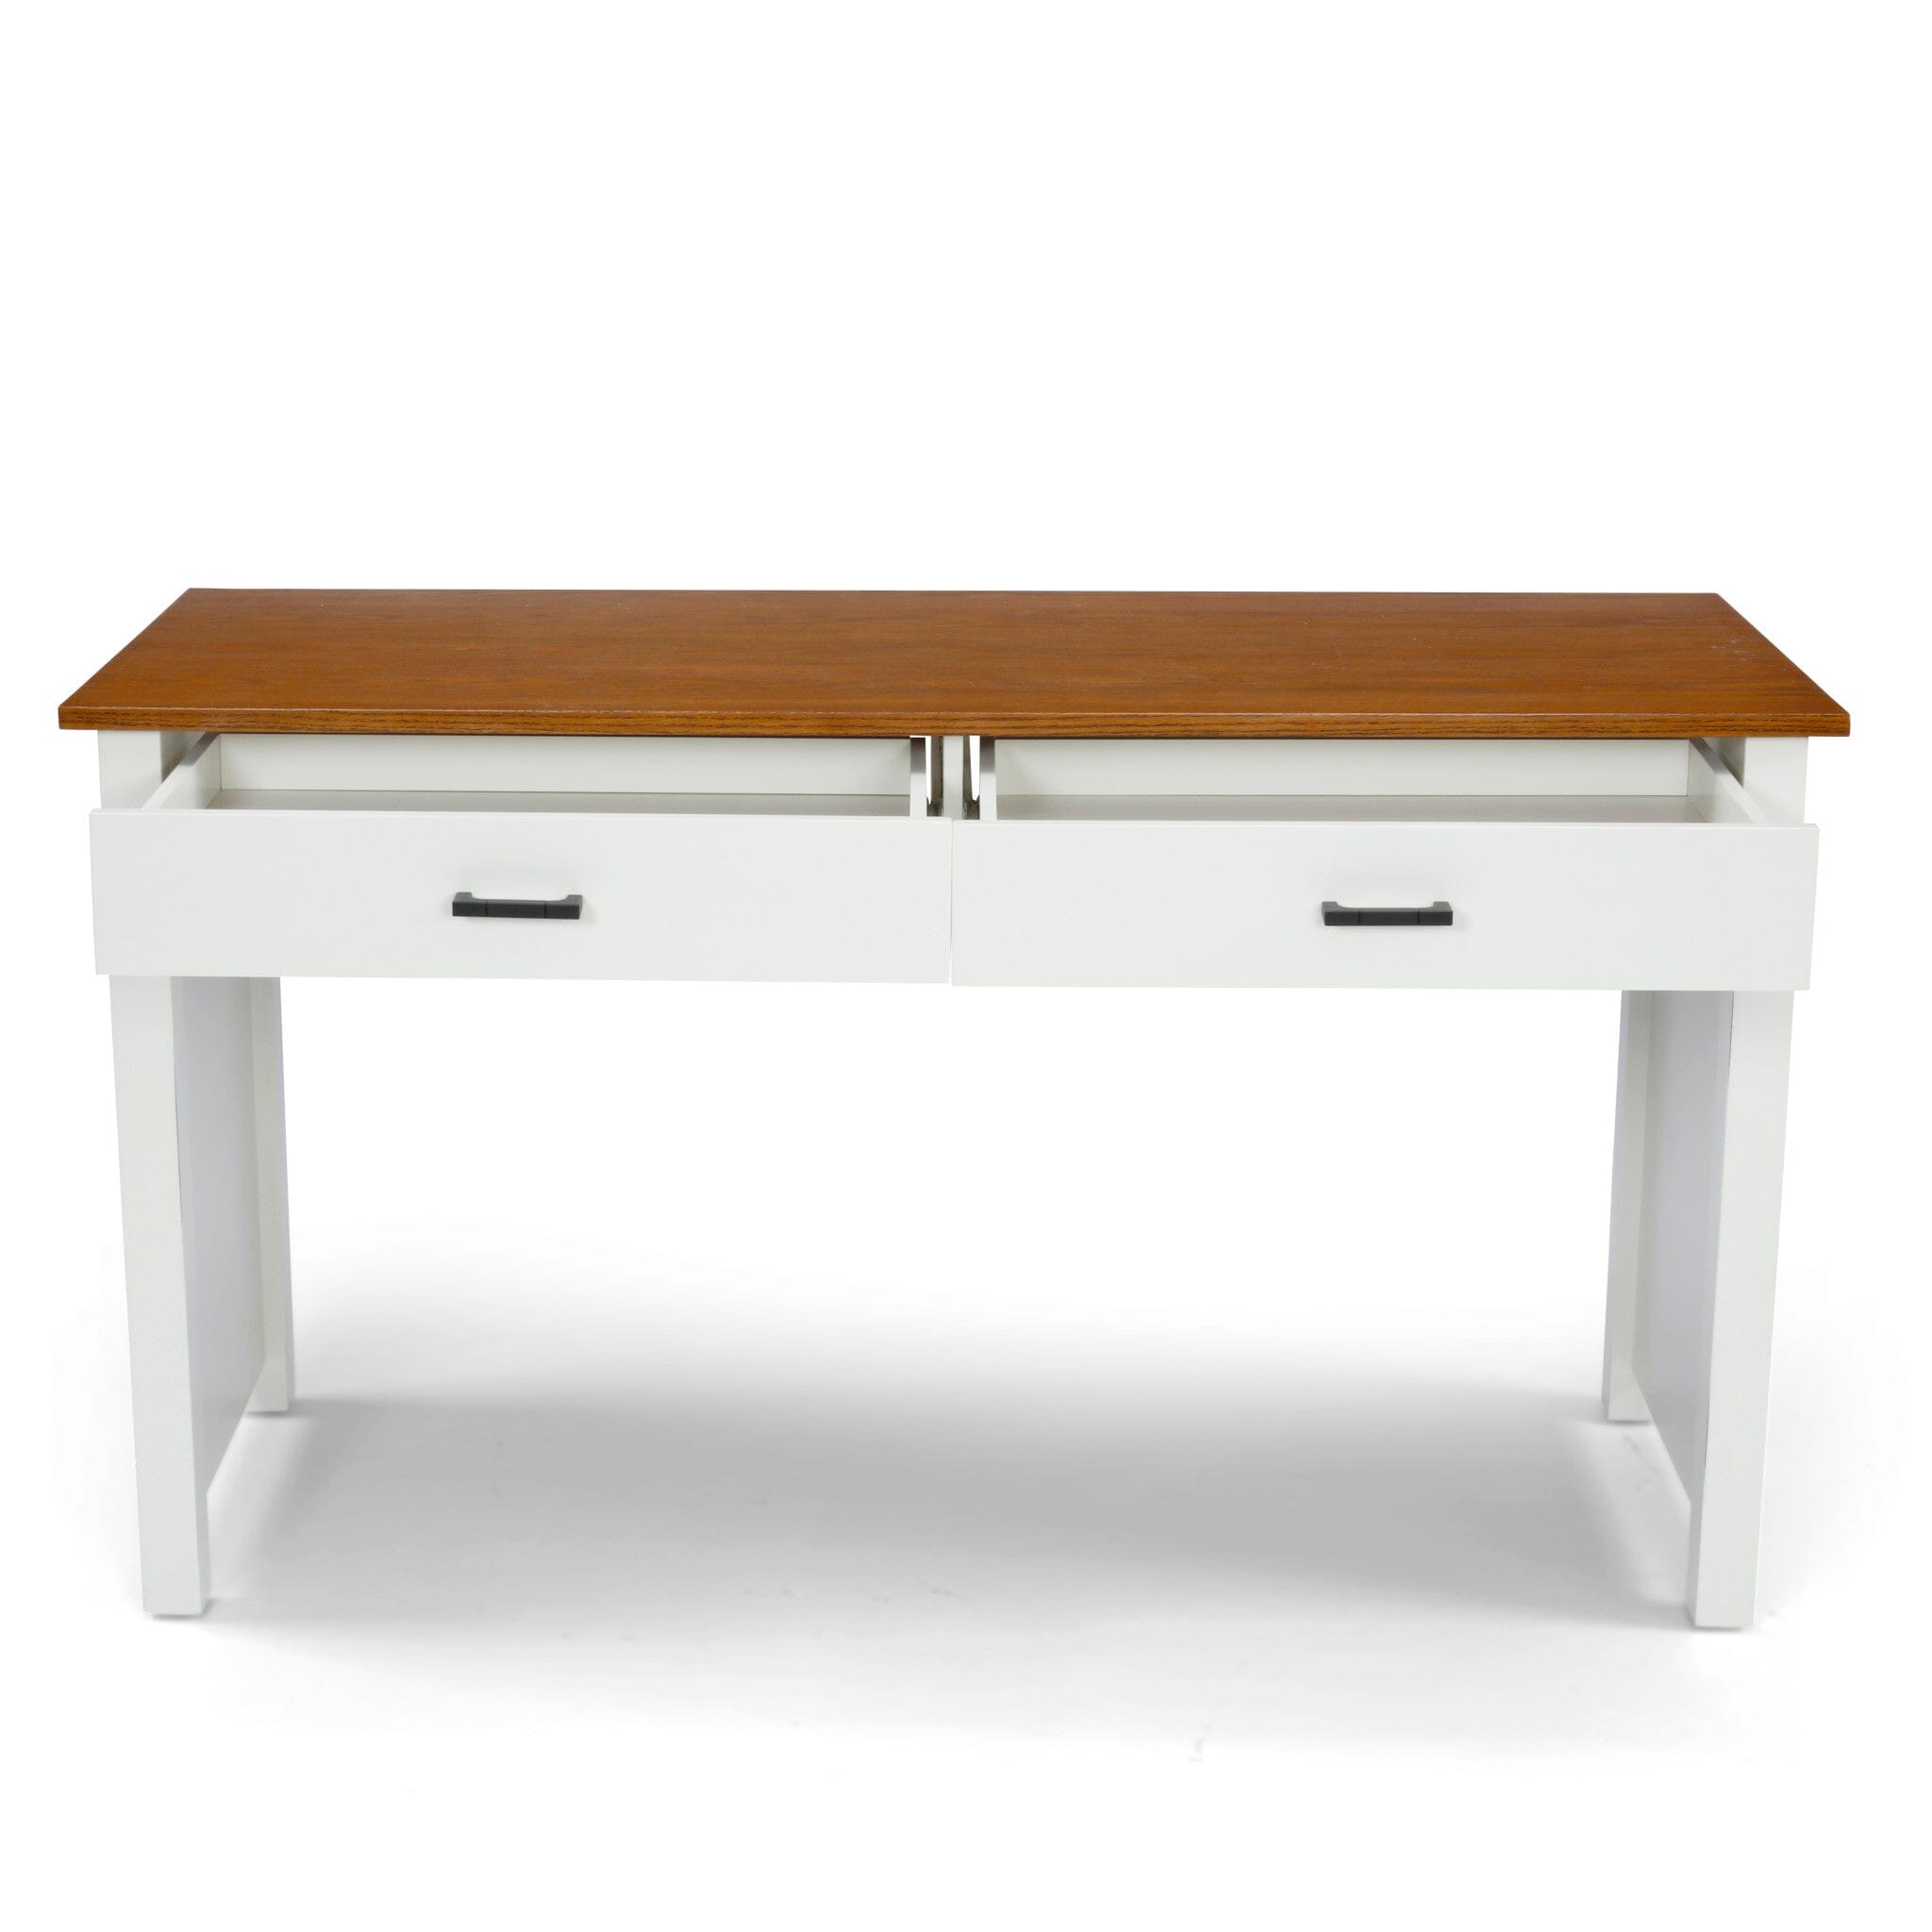 Traditional Writing Desk By Portsmouth Desk Portsmouth